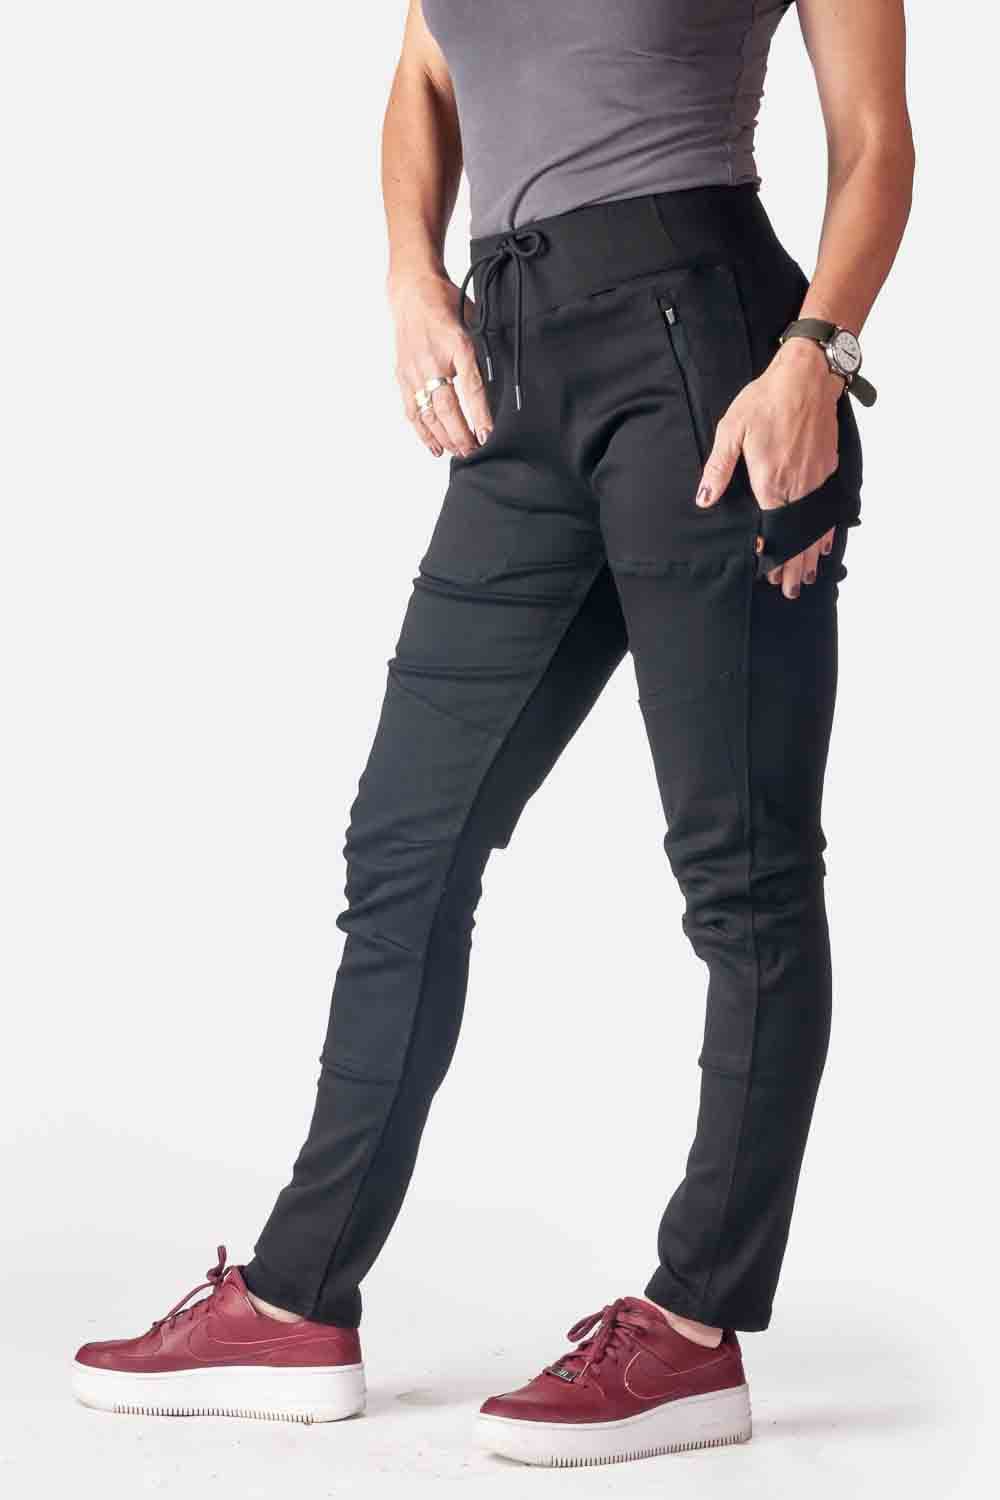 Dovetail Workwear Women's Black Work Pants (6/8 X 31) in the Pants  department at